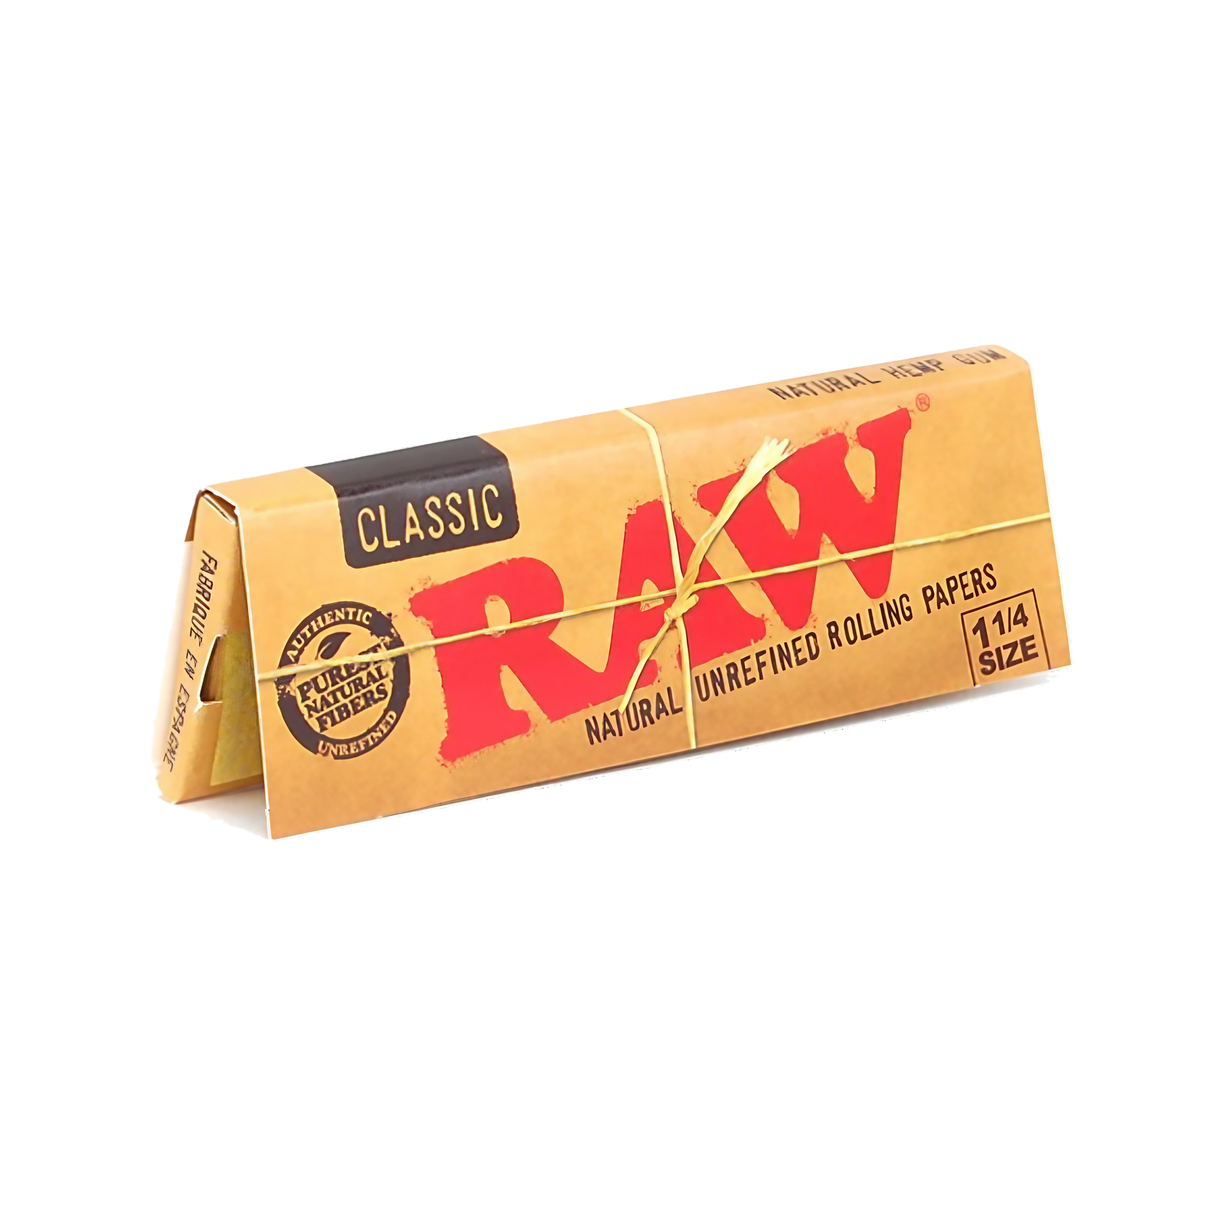 RAW Classic 1 1/4" Hemp Rolling Papers Bulk 24 Pack on White Background